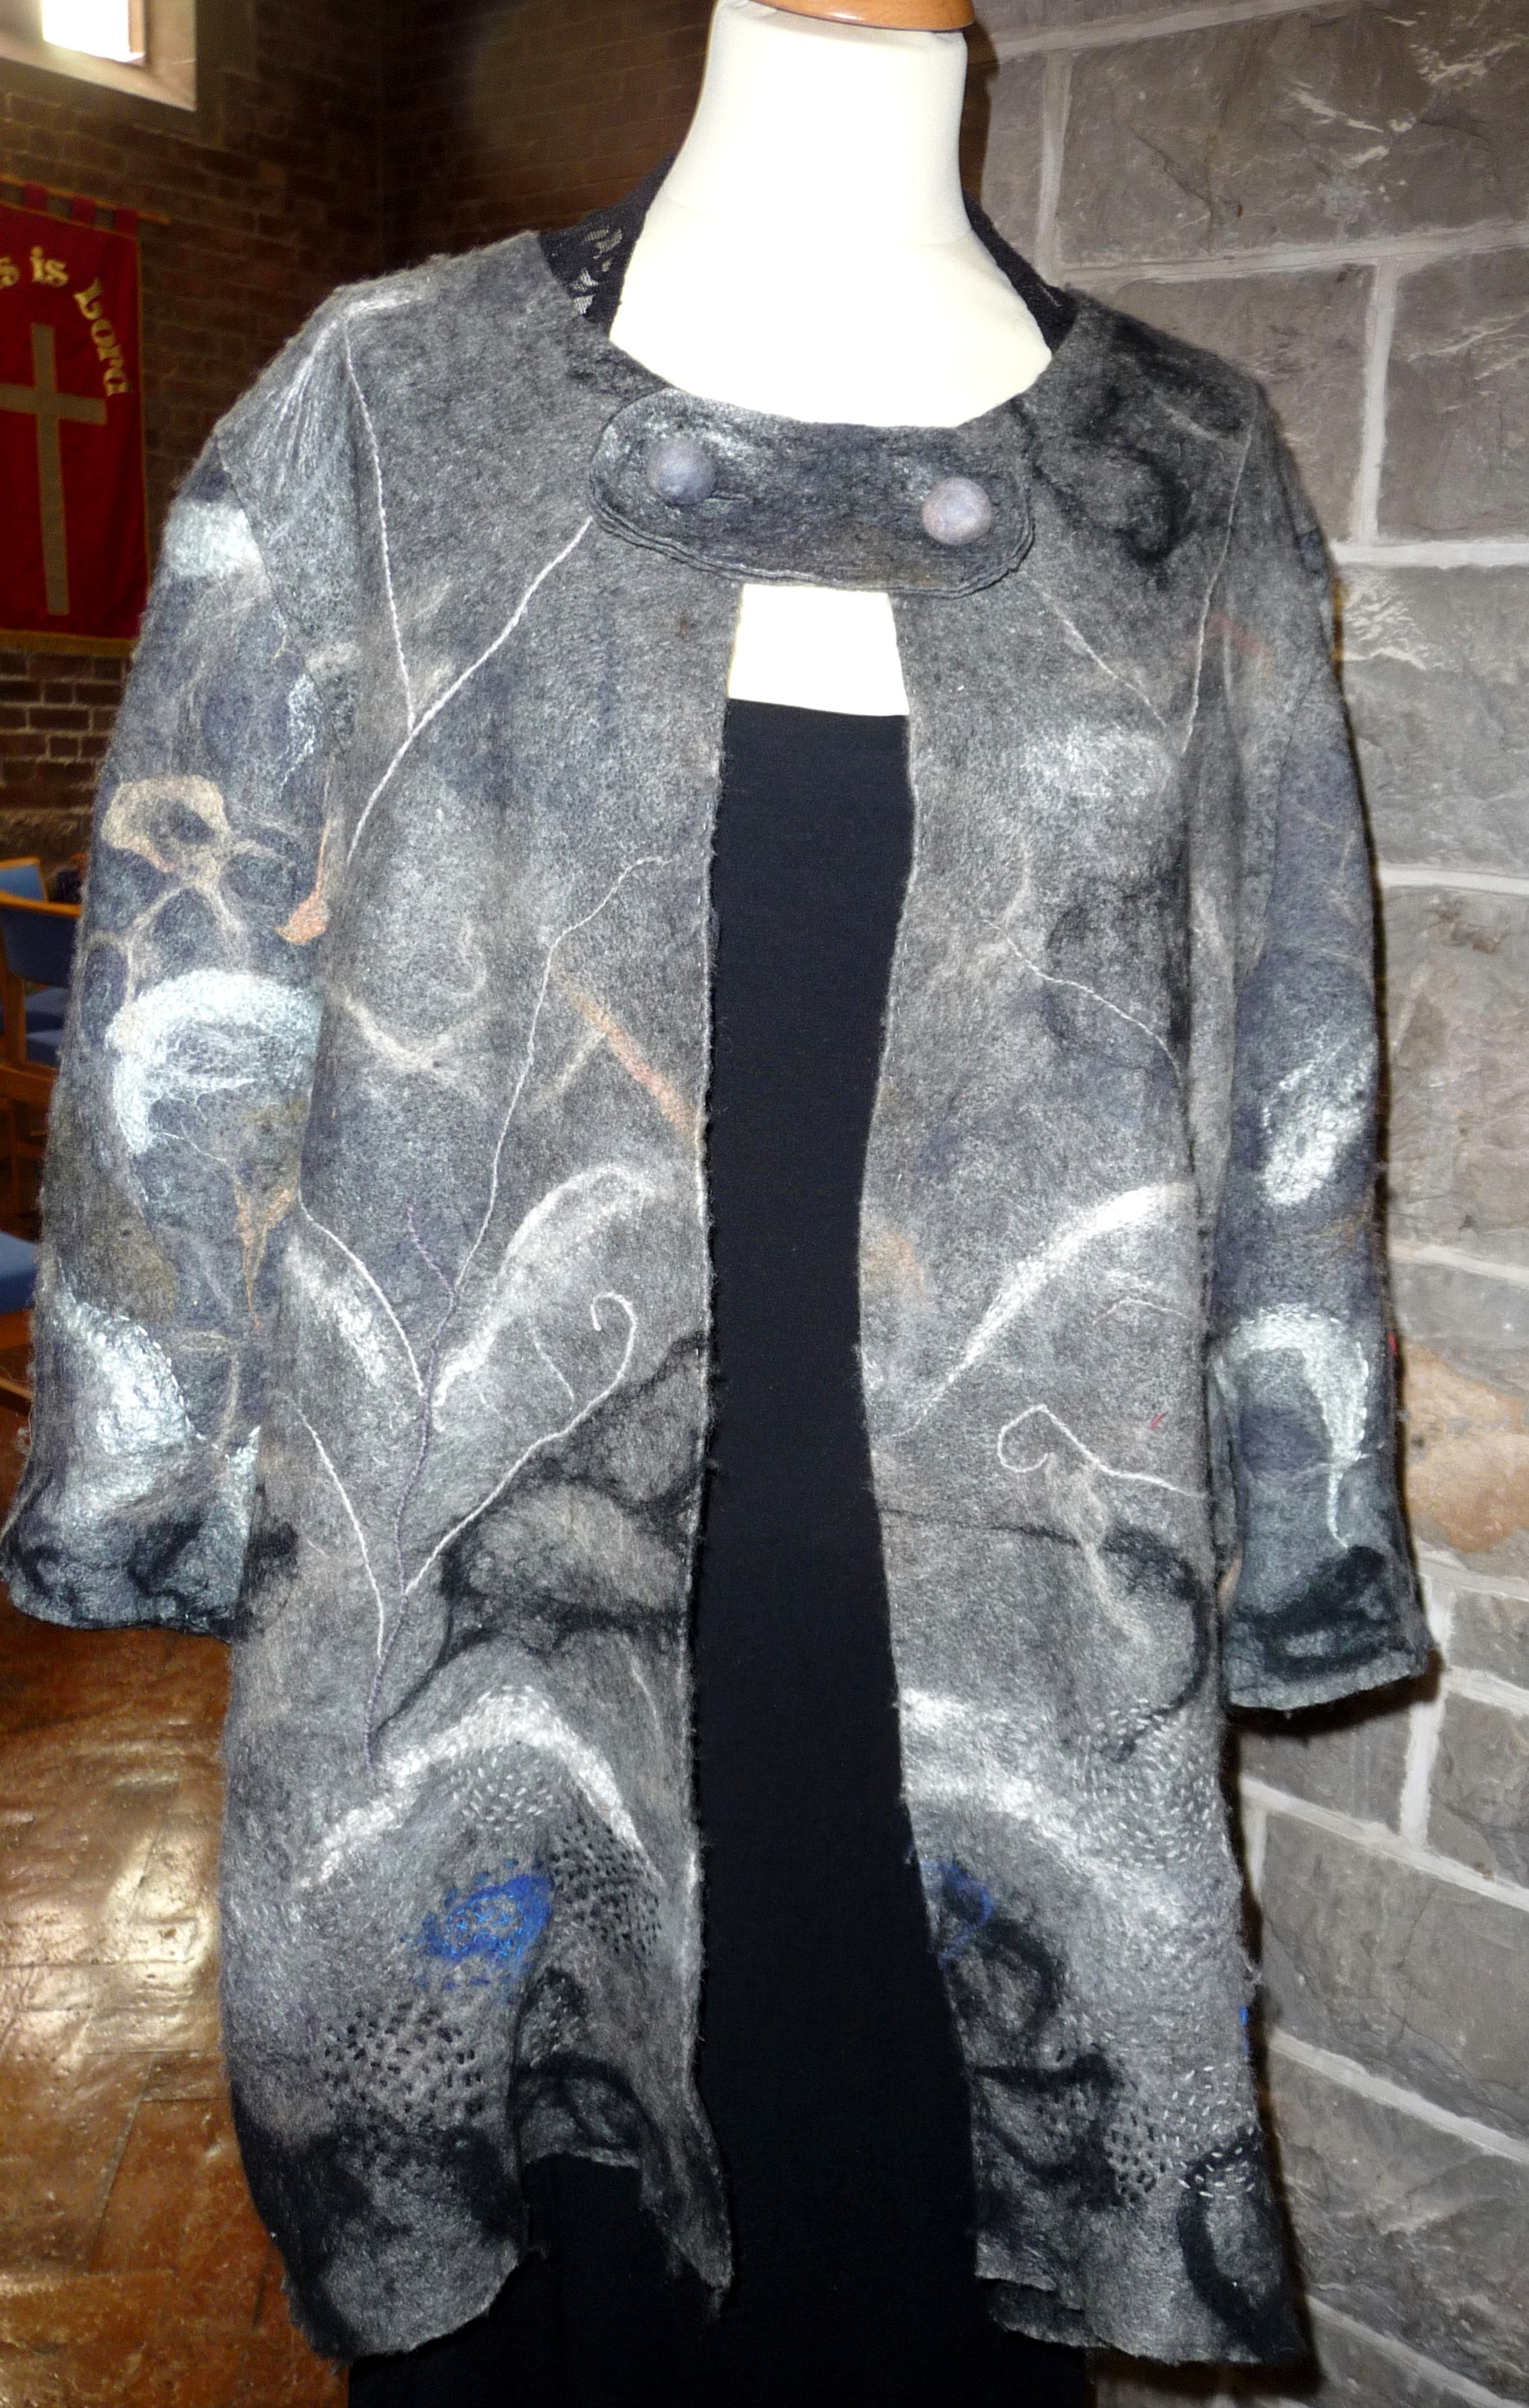 FELTED JACKET by Mary Southern, hand embroidered, felted merino fibres on silk pre-felt, inspired by grey skies